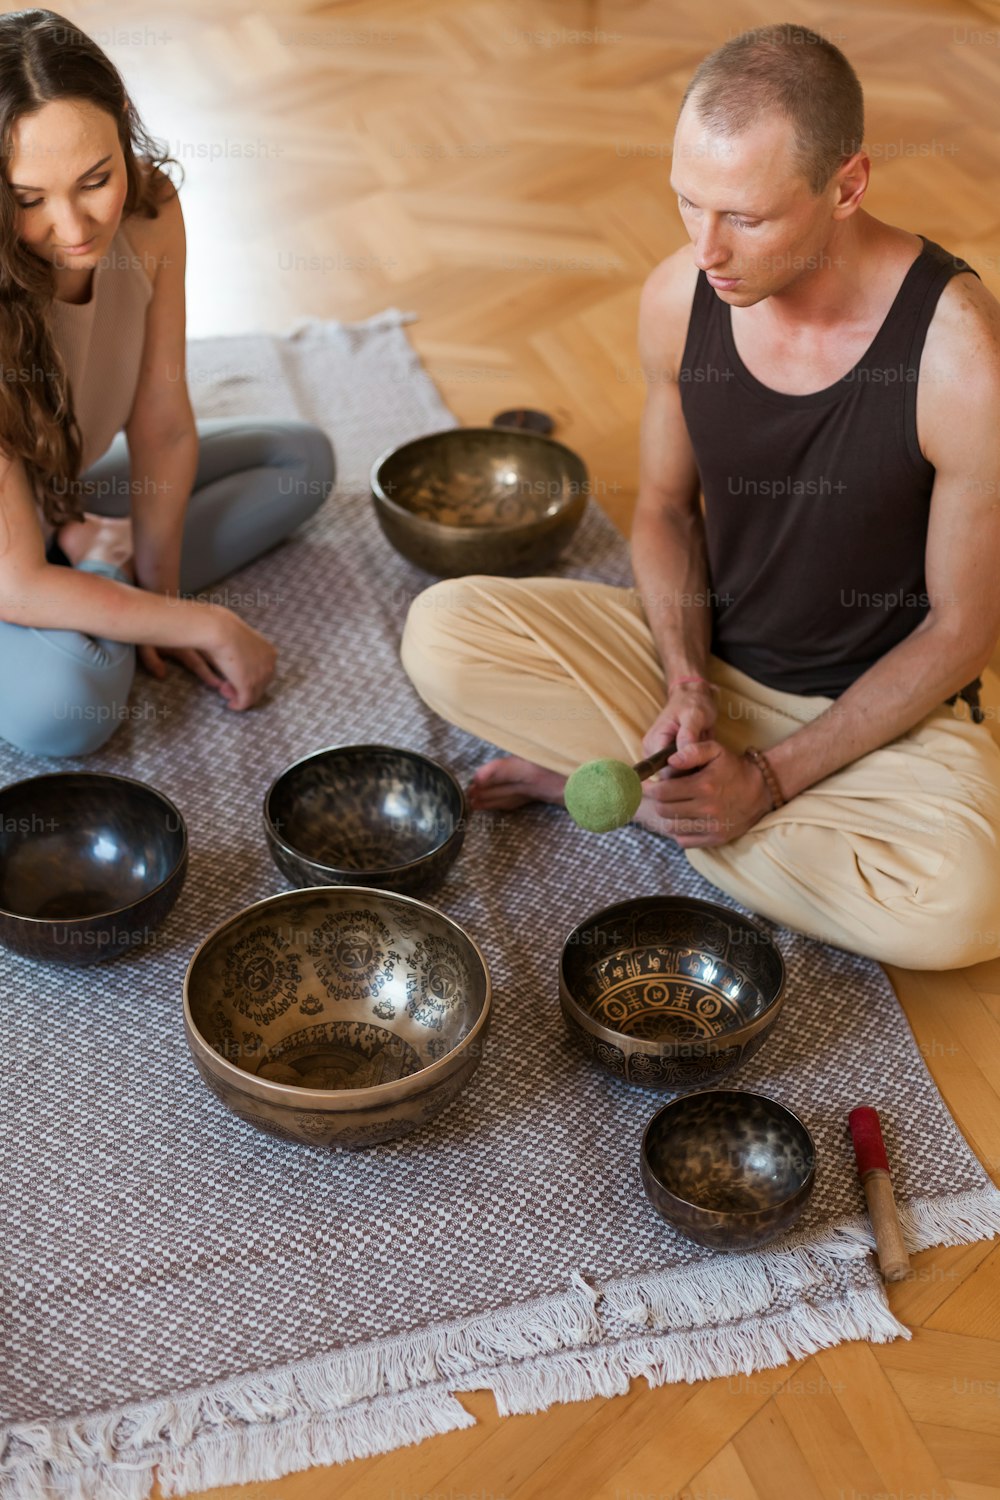 a man and a woman sitting on the floor in front of bowls